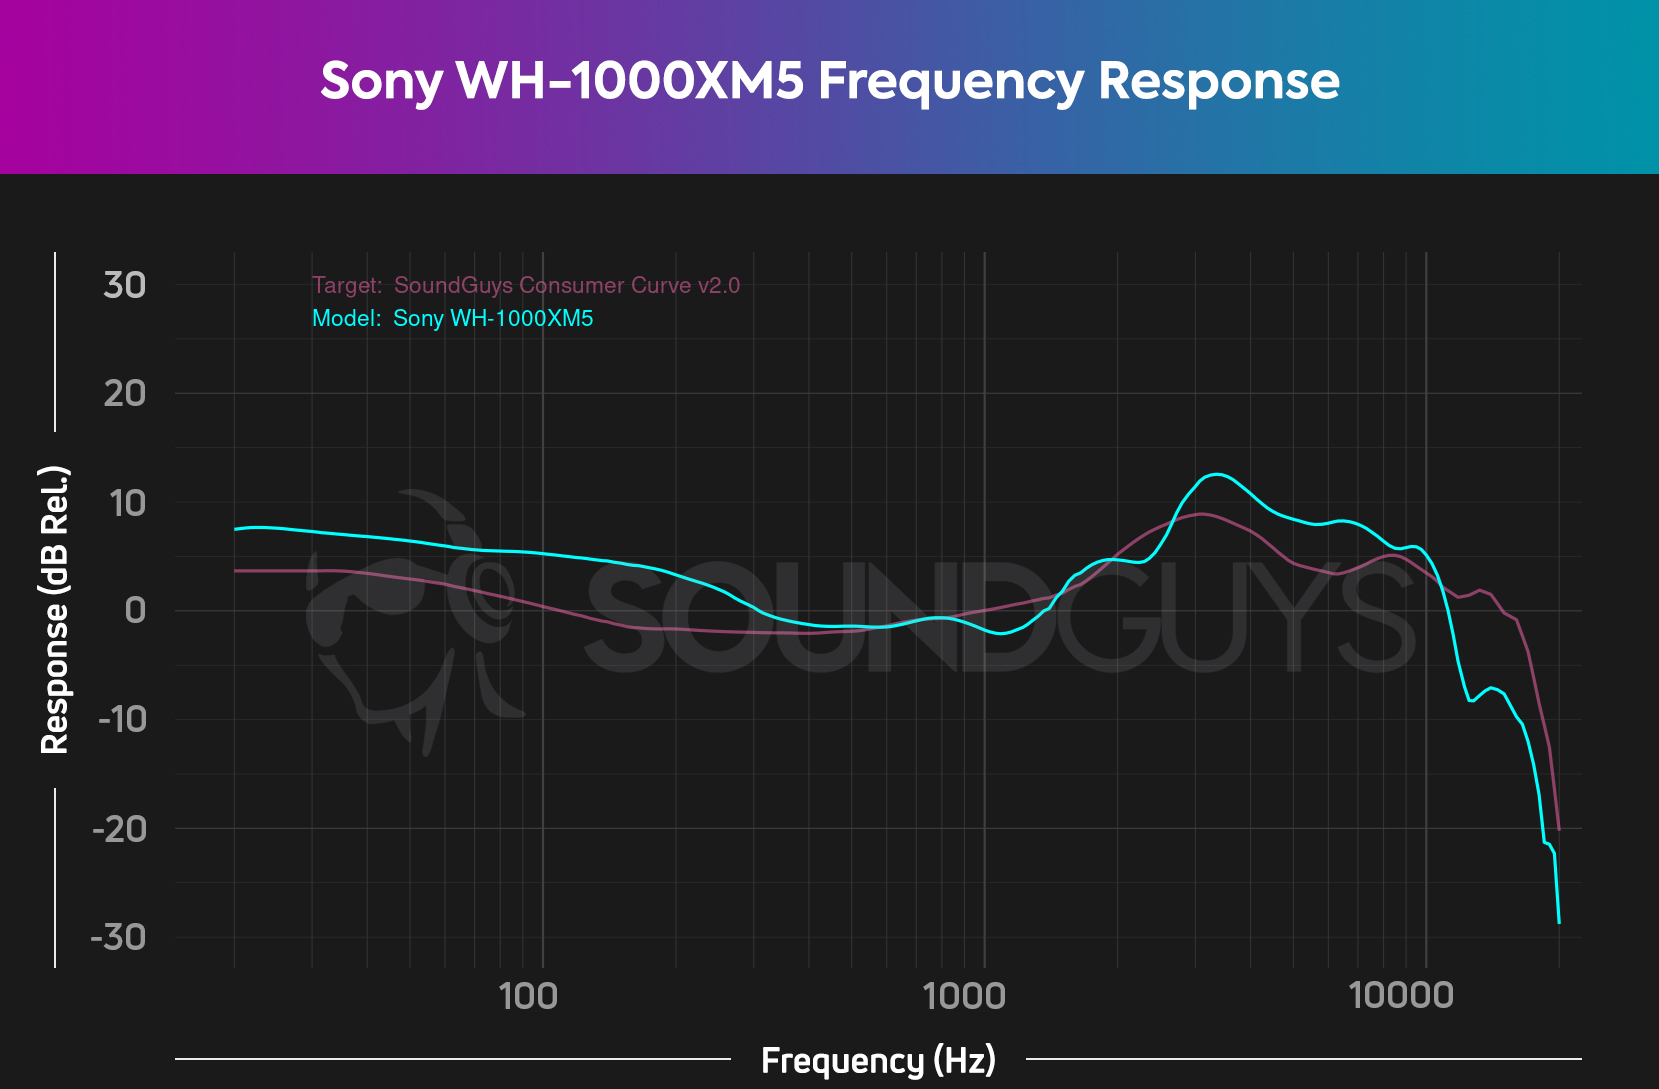 The Sony WH-1000XM5 boosts sounds up to 300Hz by about 5dB.